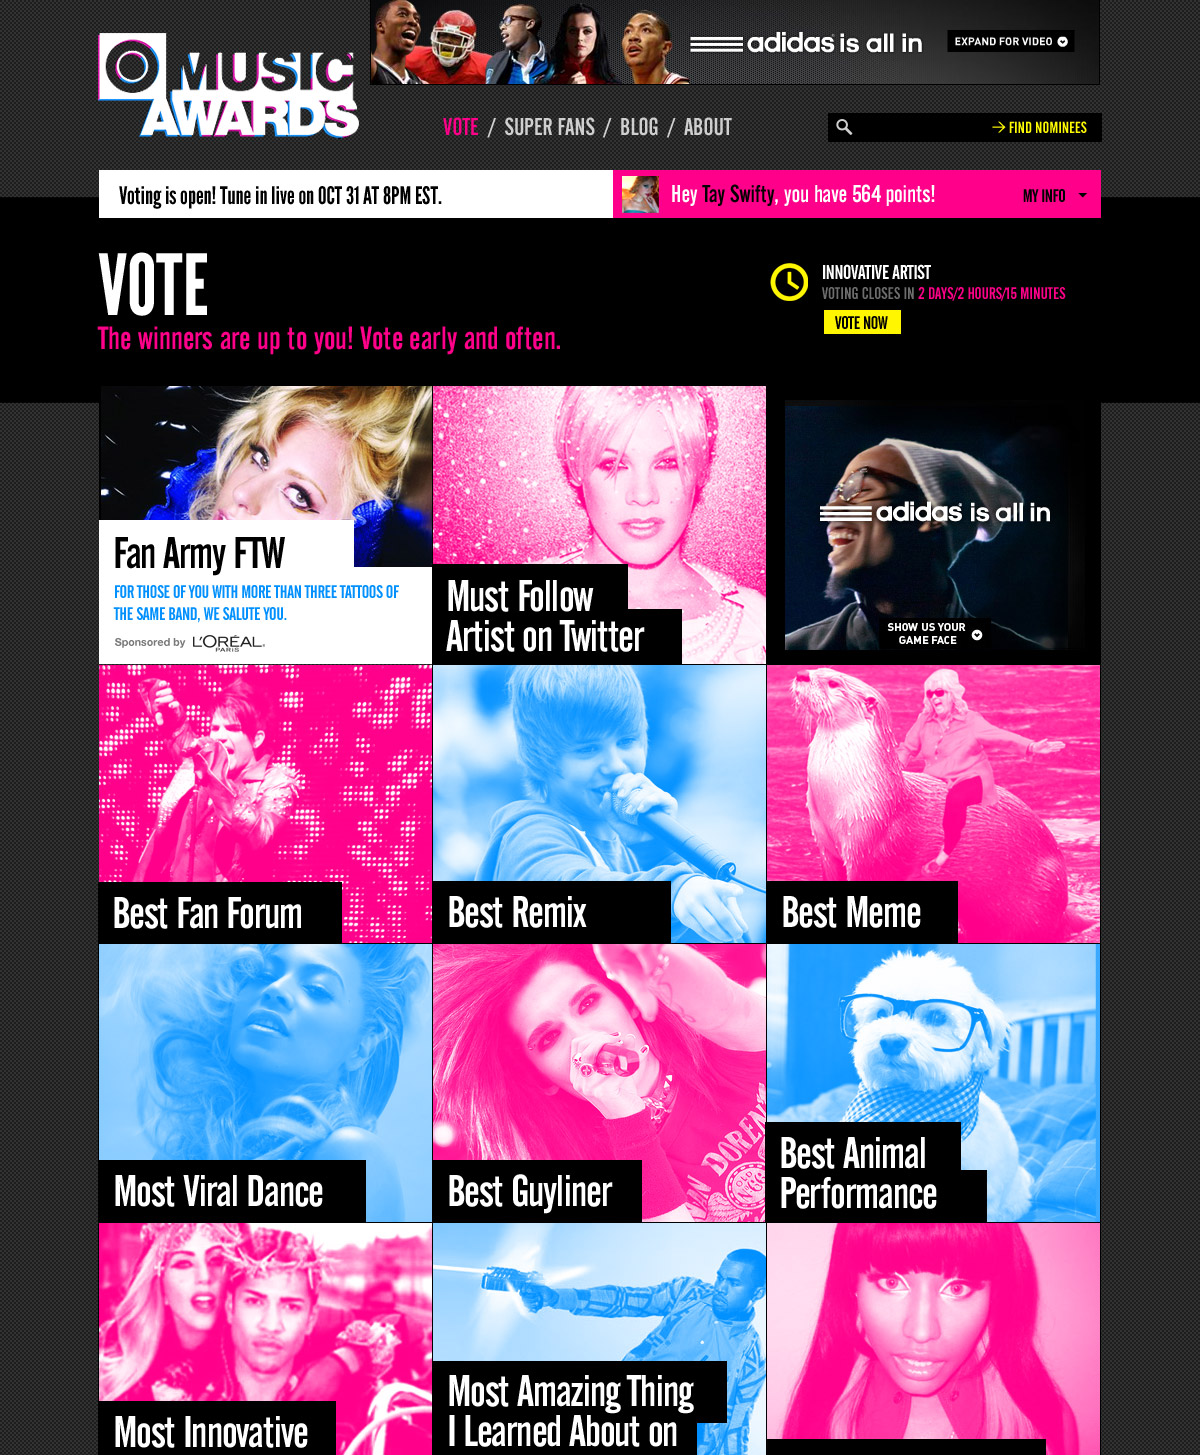 Design for the second annual MTV O Music Awards